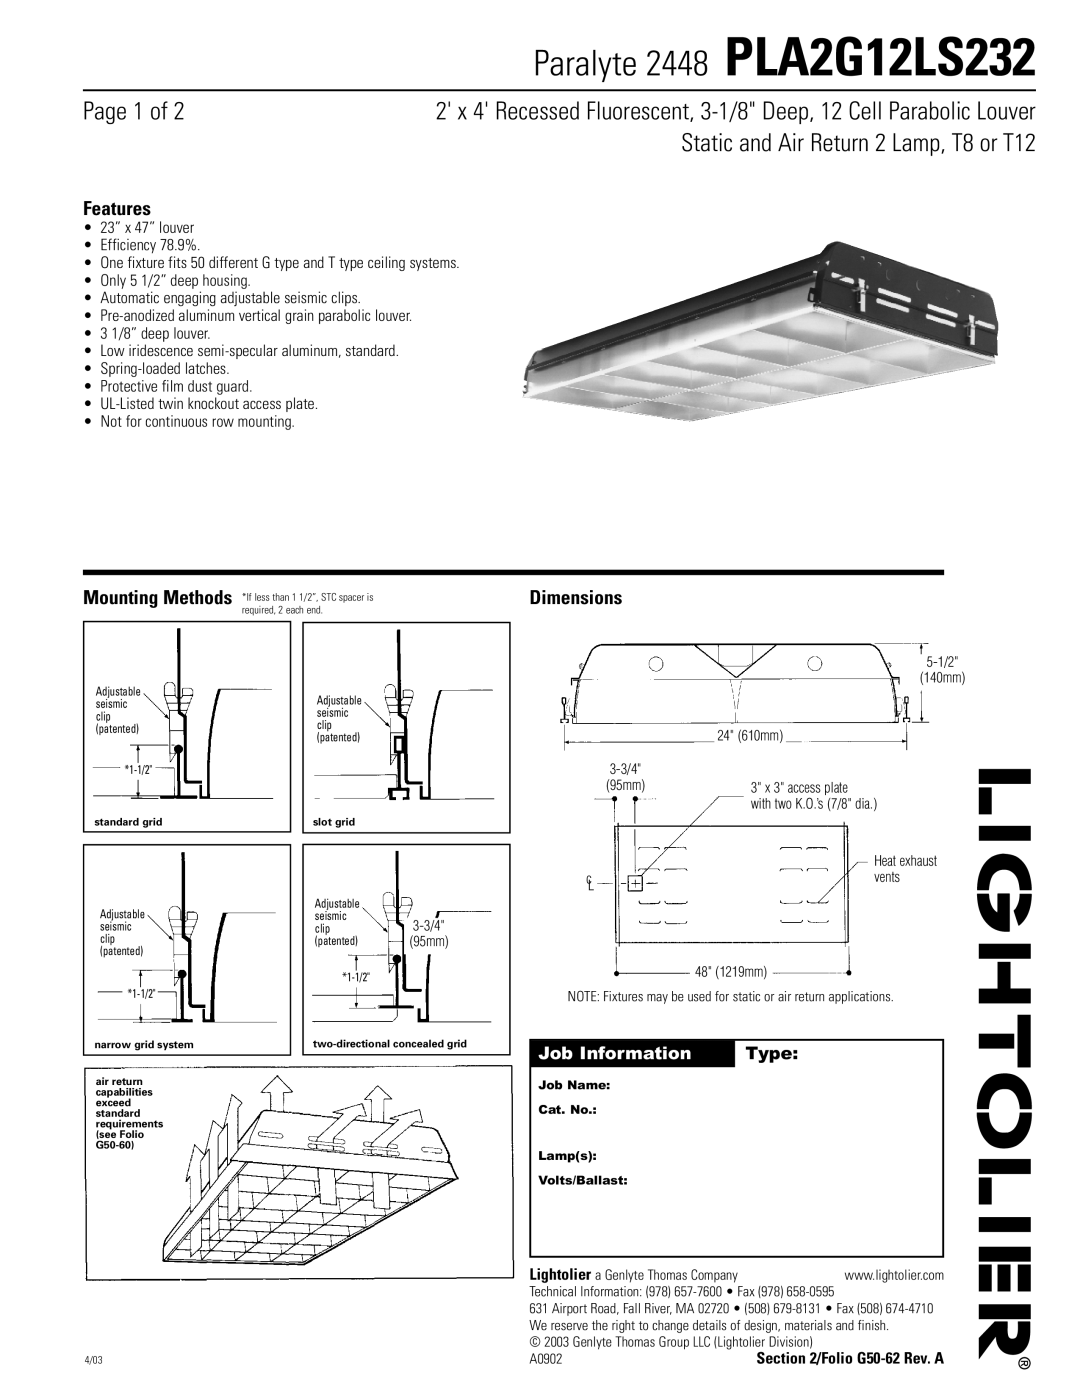 Lightolier dimensions Paralyte 2448 PLA2G12LS232, Page 1 of, Static and Air Return 2 Lamp, T8 or T12, Features, Type 